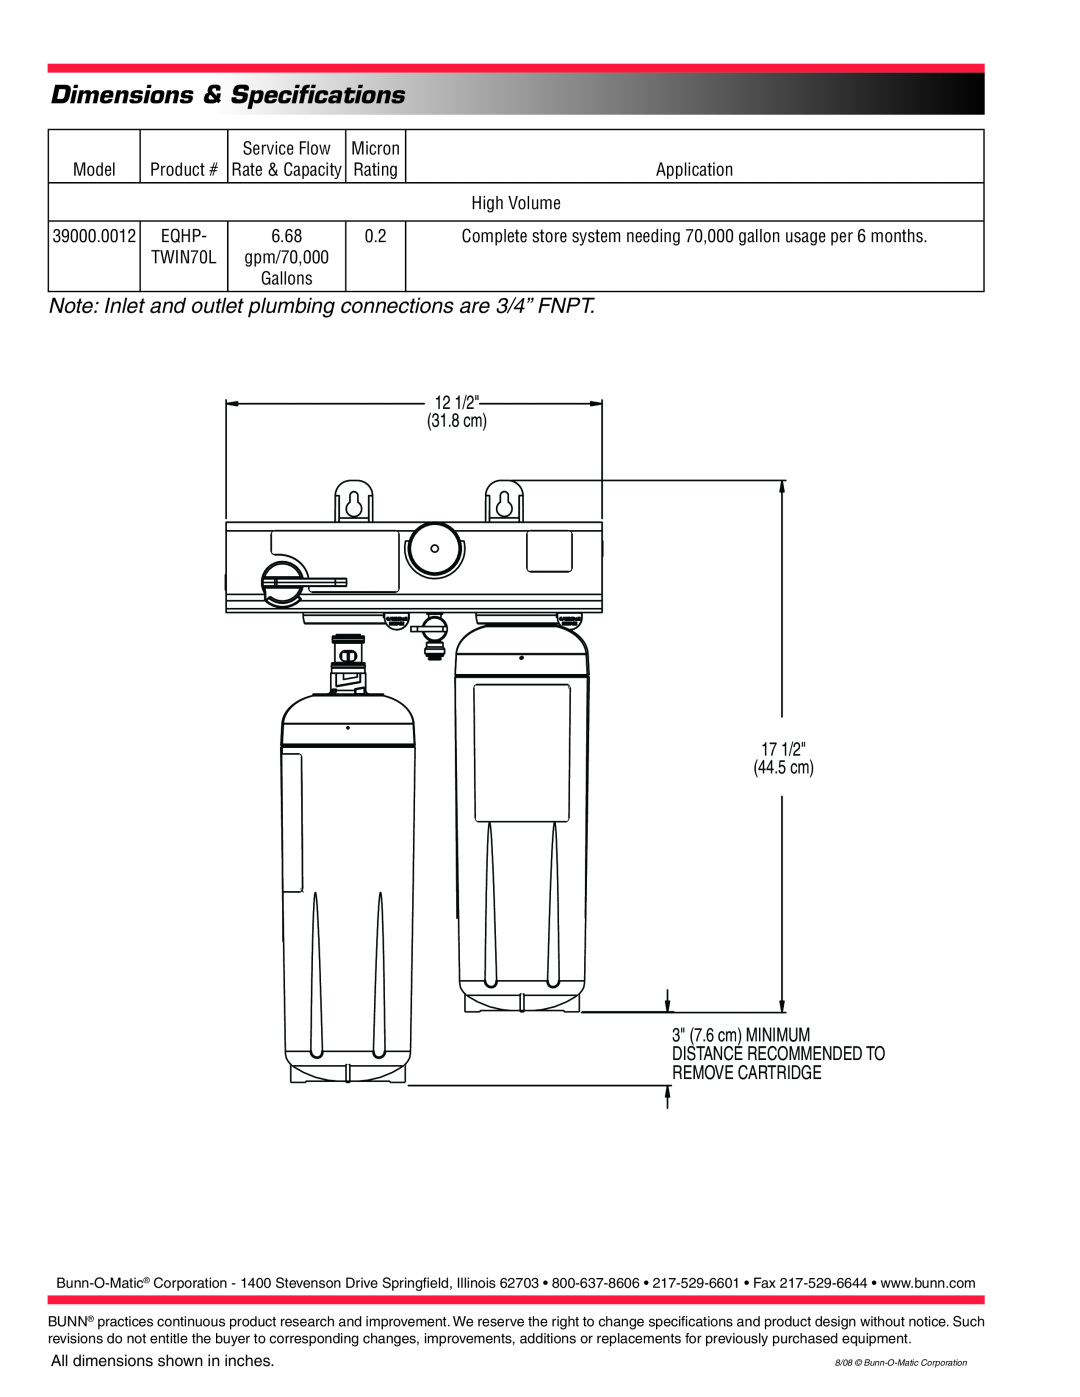 Bunn EQHP-TWIN 70L Dimensions & Specifications, Note Inlet and outlet plumbing connections are 3/4” FNPT, Product # 